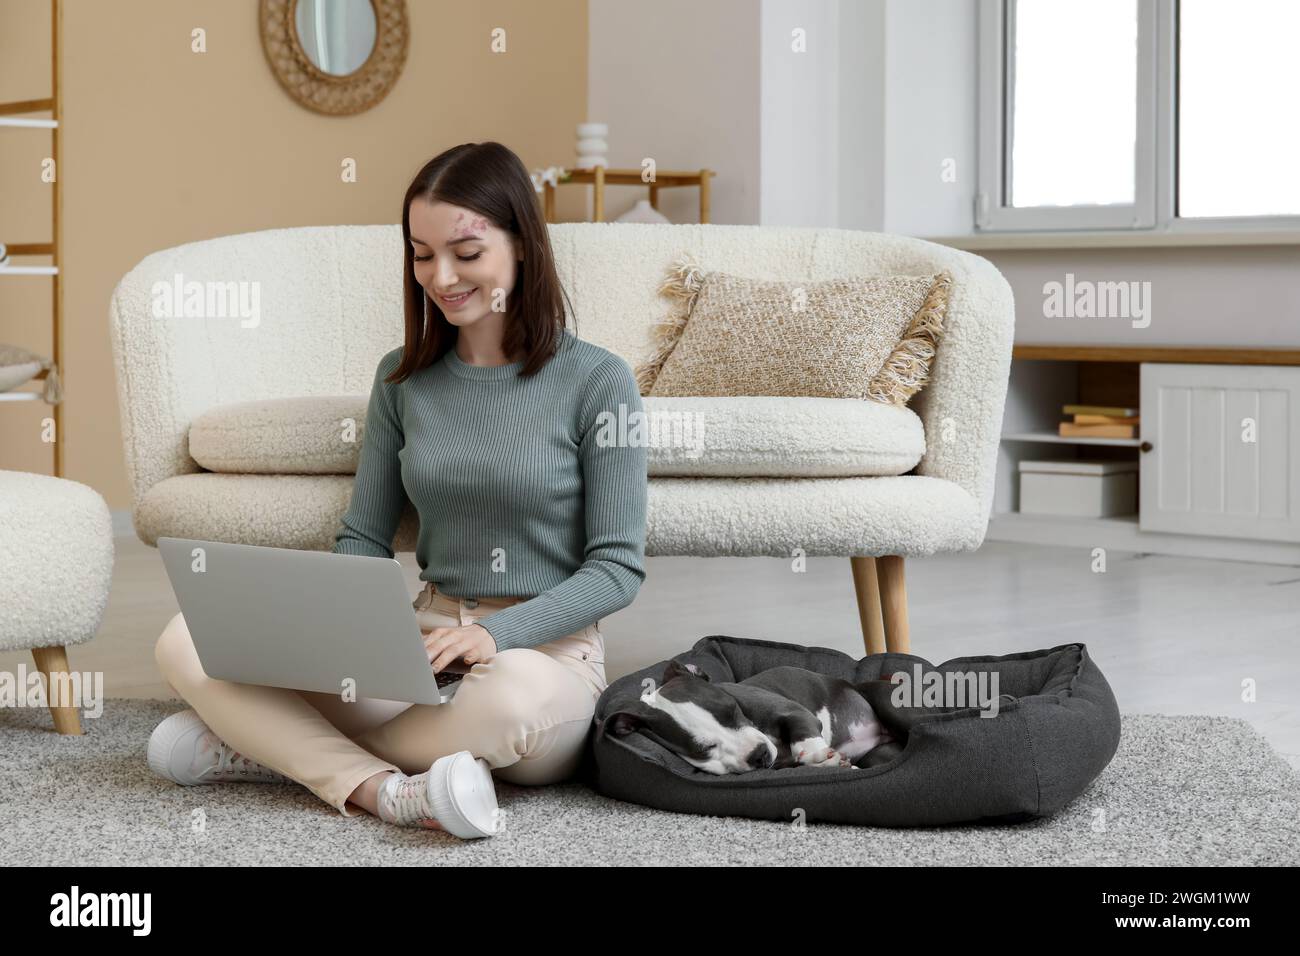 Beautiful young woman with laptop and cute staffordshire terrier puppy sleeping in pet bed at home Stock Photo